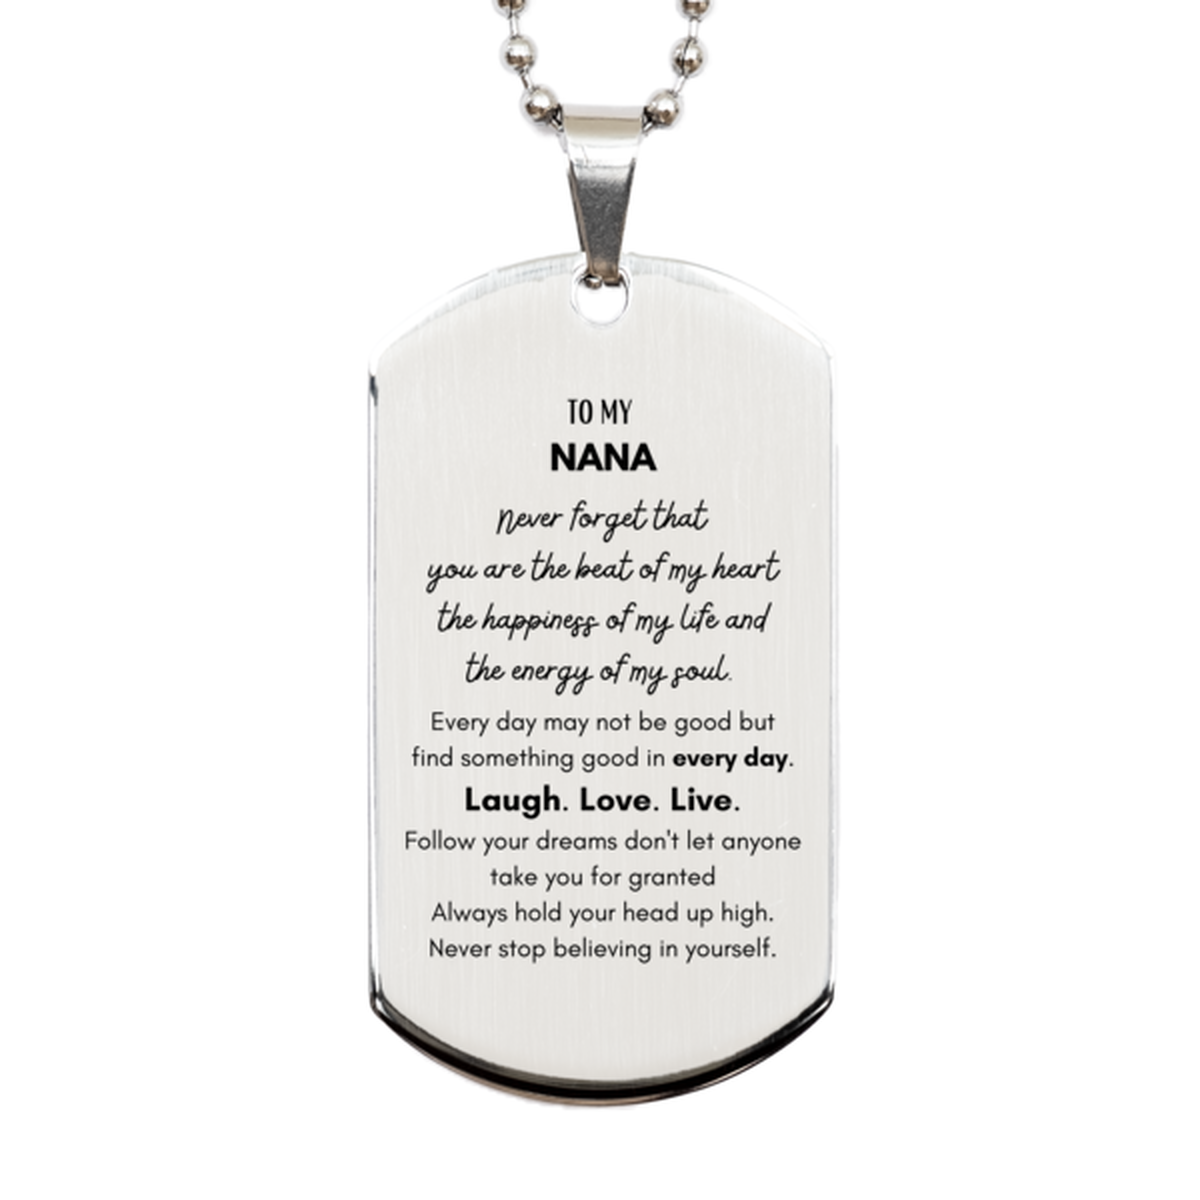 To My Nana Dogtag Gifts, Christmas Nana Silver Dog Tag Present, Birthday Unique Motivational For Nana, To My Nana Never forget that you are the beat of my heart the happiness of my life and the energy of my soul